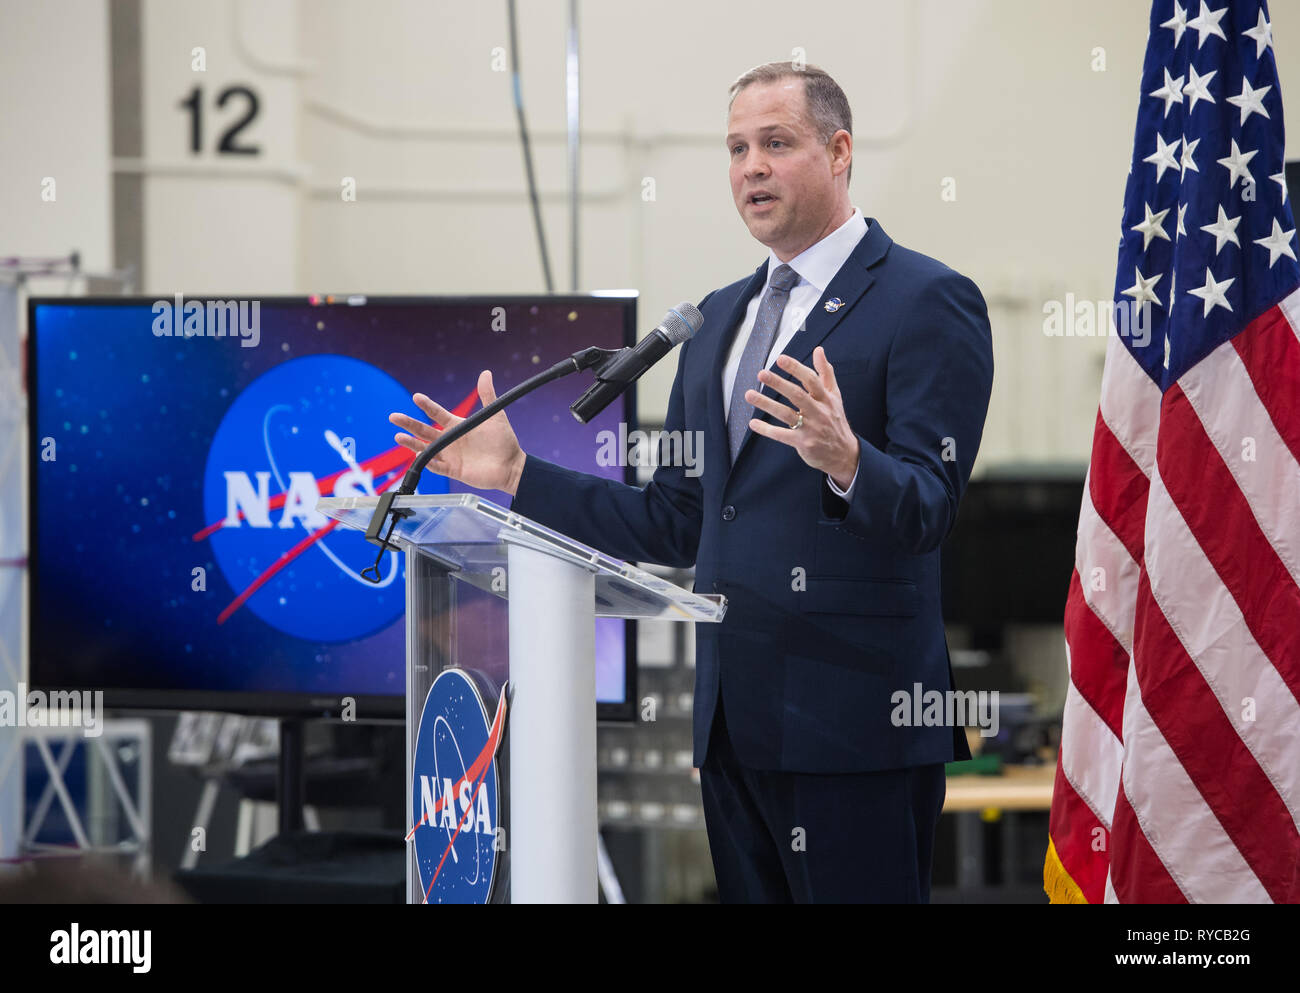 NASA Administrator Jim Bridenstine addresses employees on progress toward sending astronauts to the Moon and on to Mars during a televised event at the Kennedy Space Center March 11, 2019 in Cape Canaveral, Florida. Stock Photo